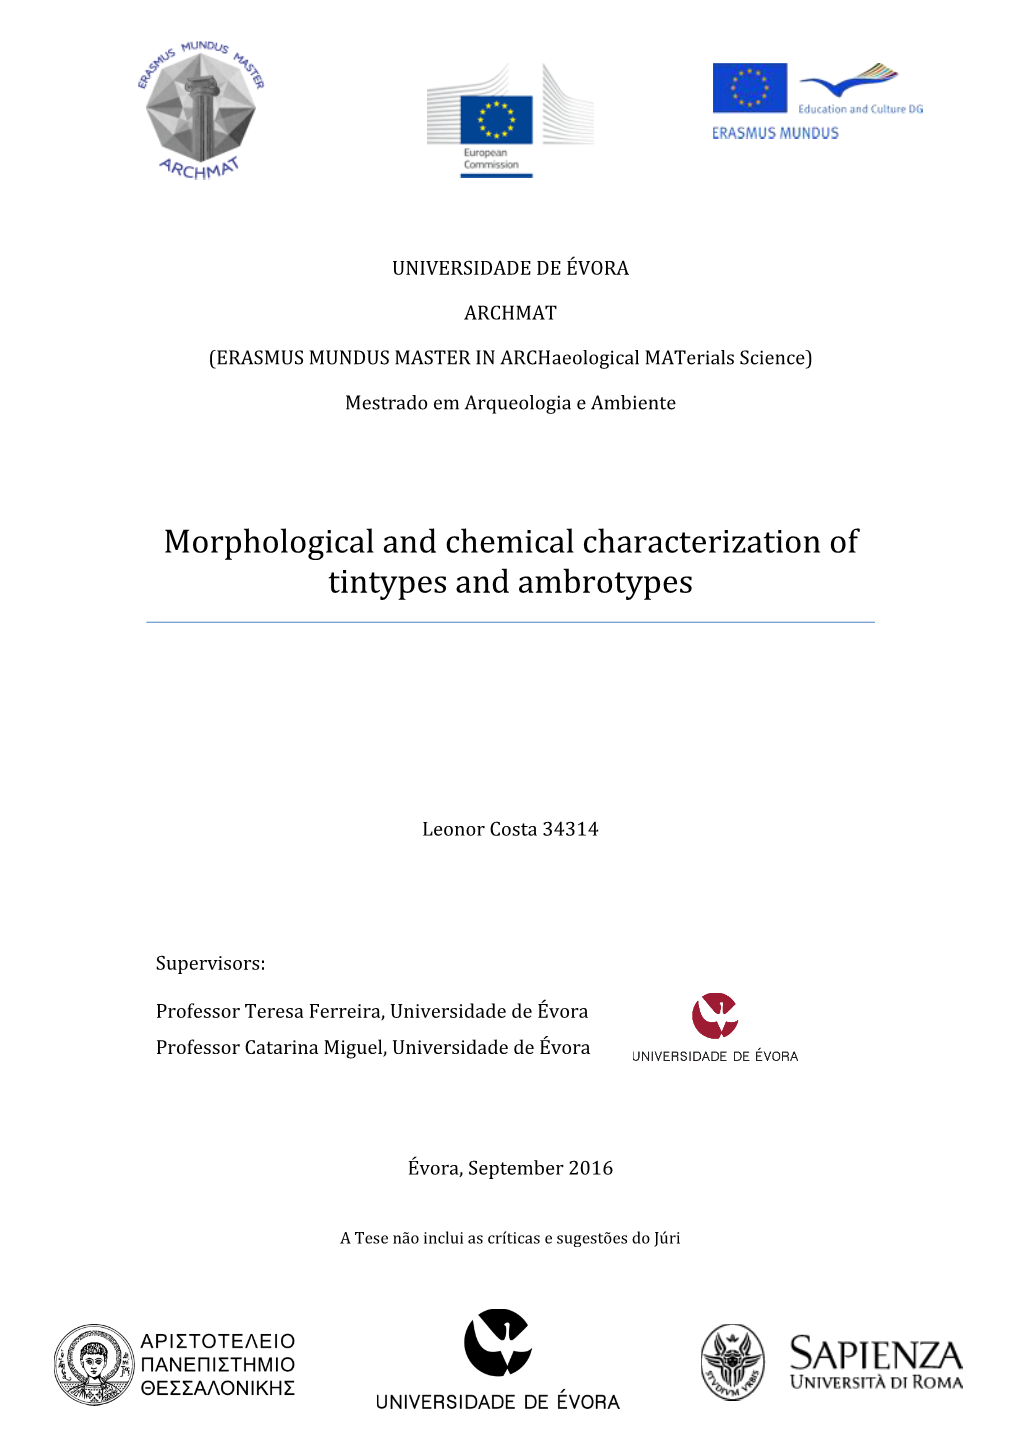 Morphological and Chemical Characterization of Tintypes and Ambrotypes